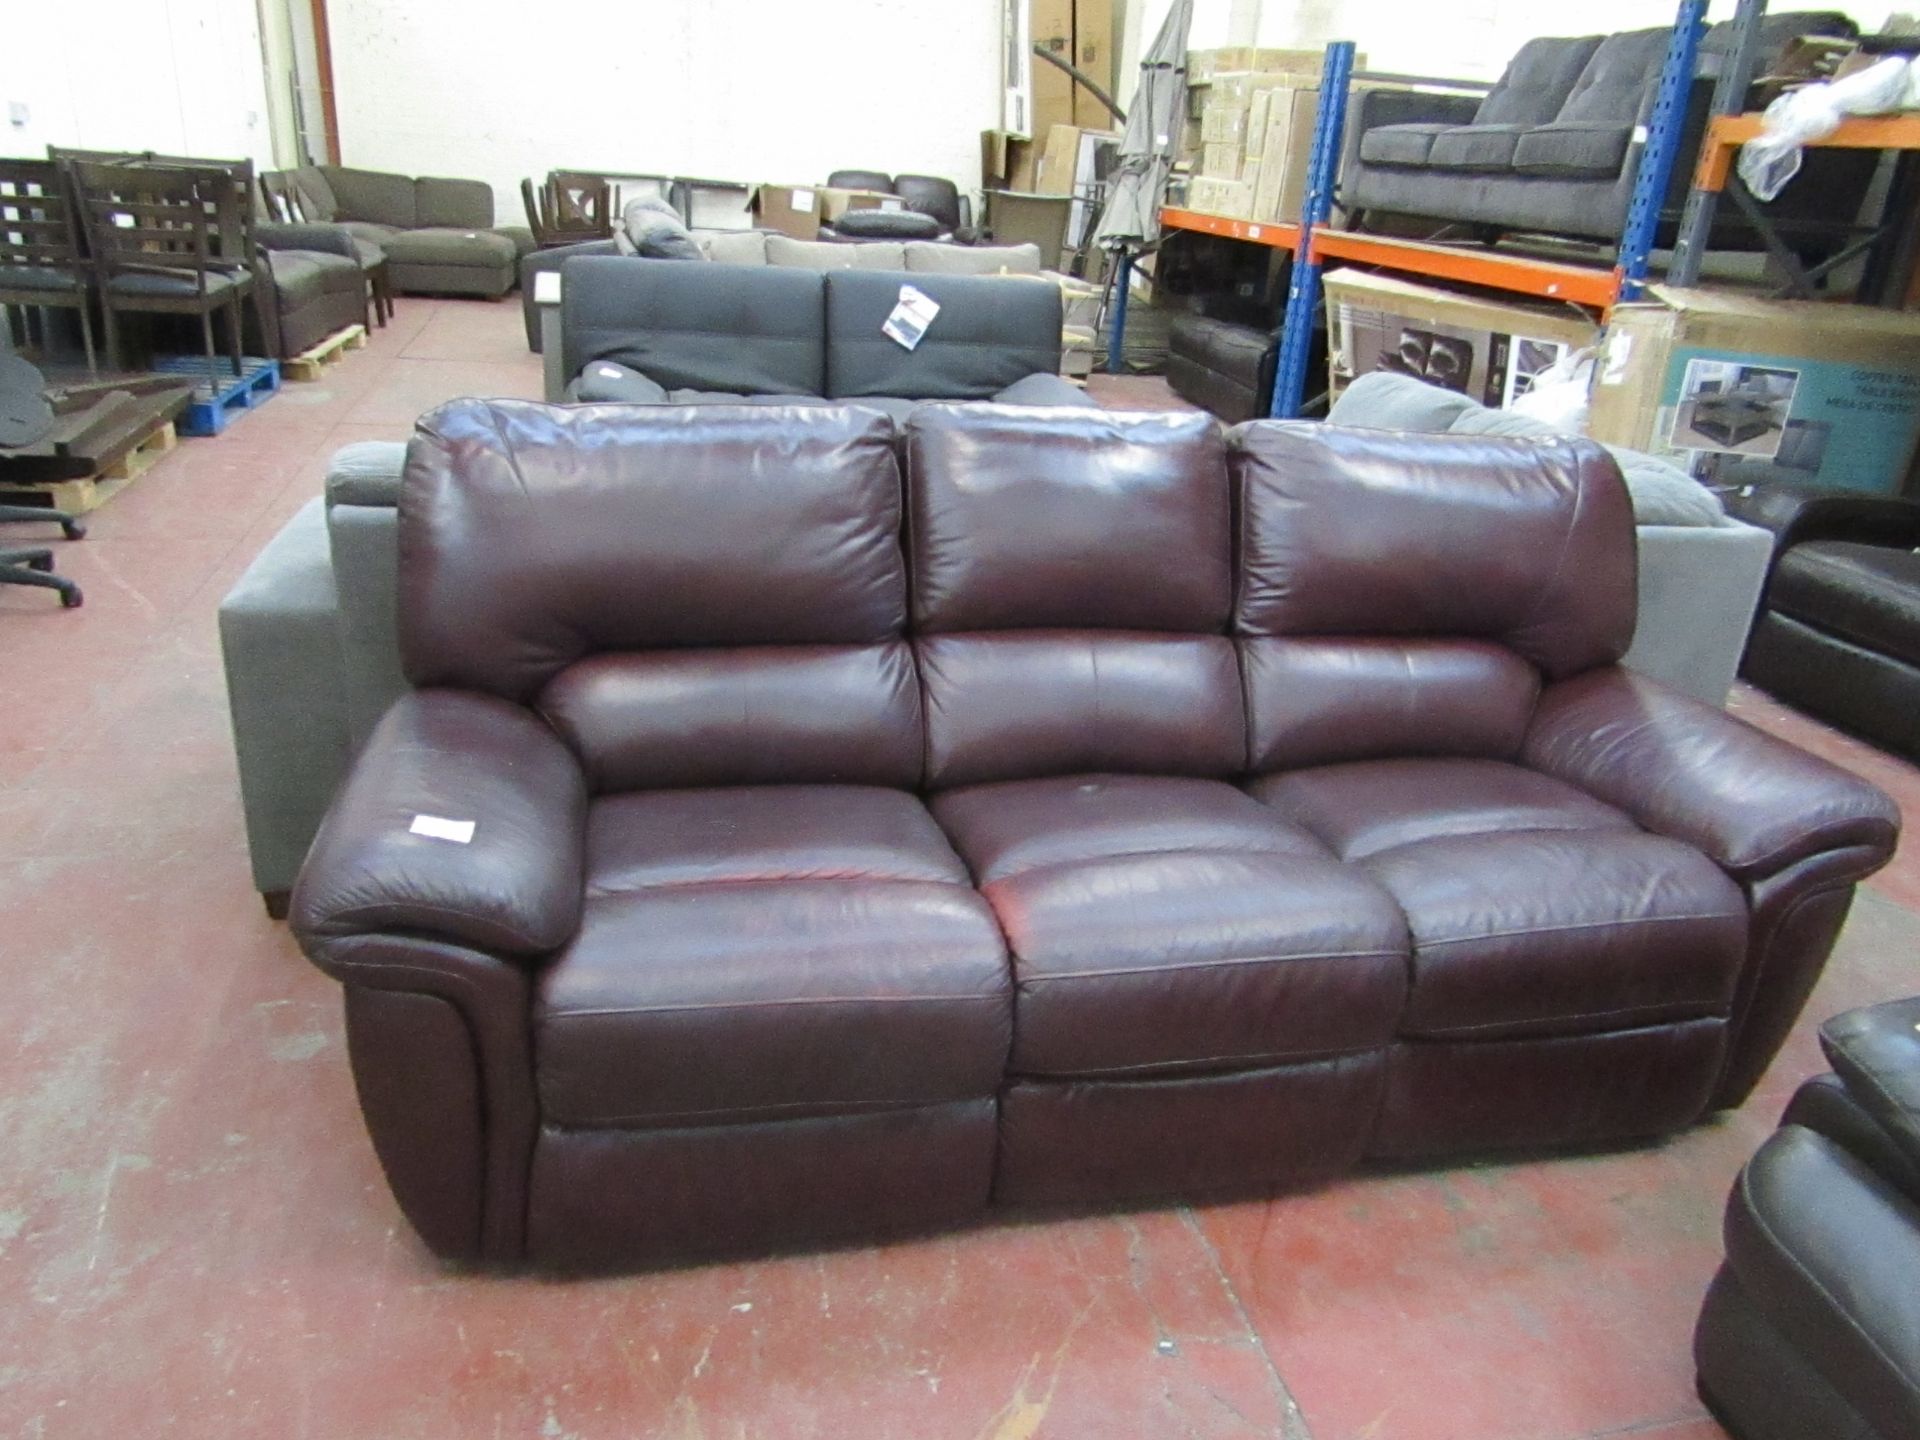 La-Z-Boy ox Blood 3 seater electric reclining sofa, no power supply to check the mechanism is